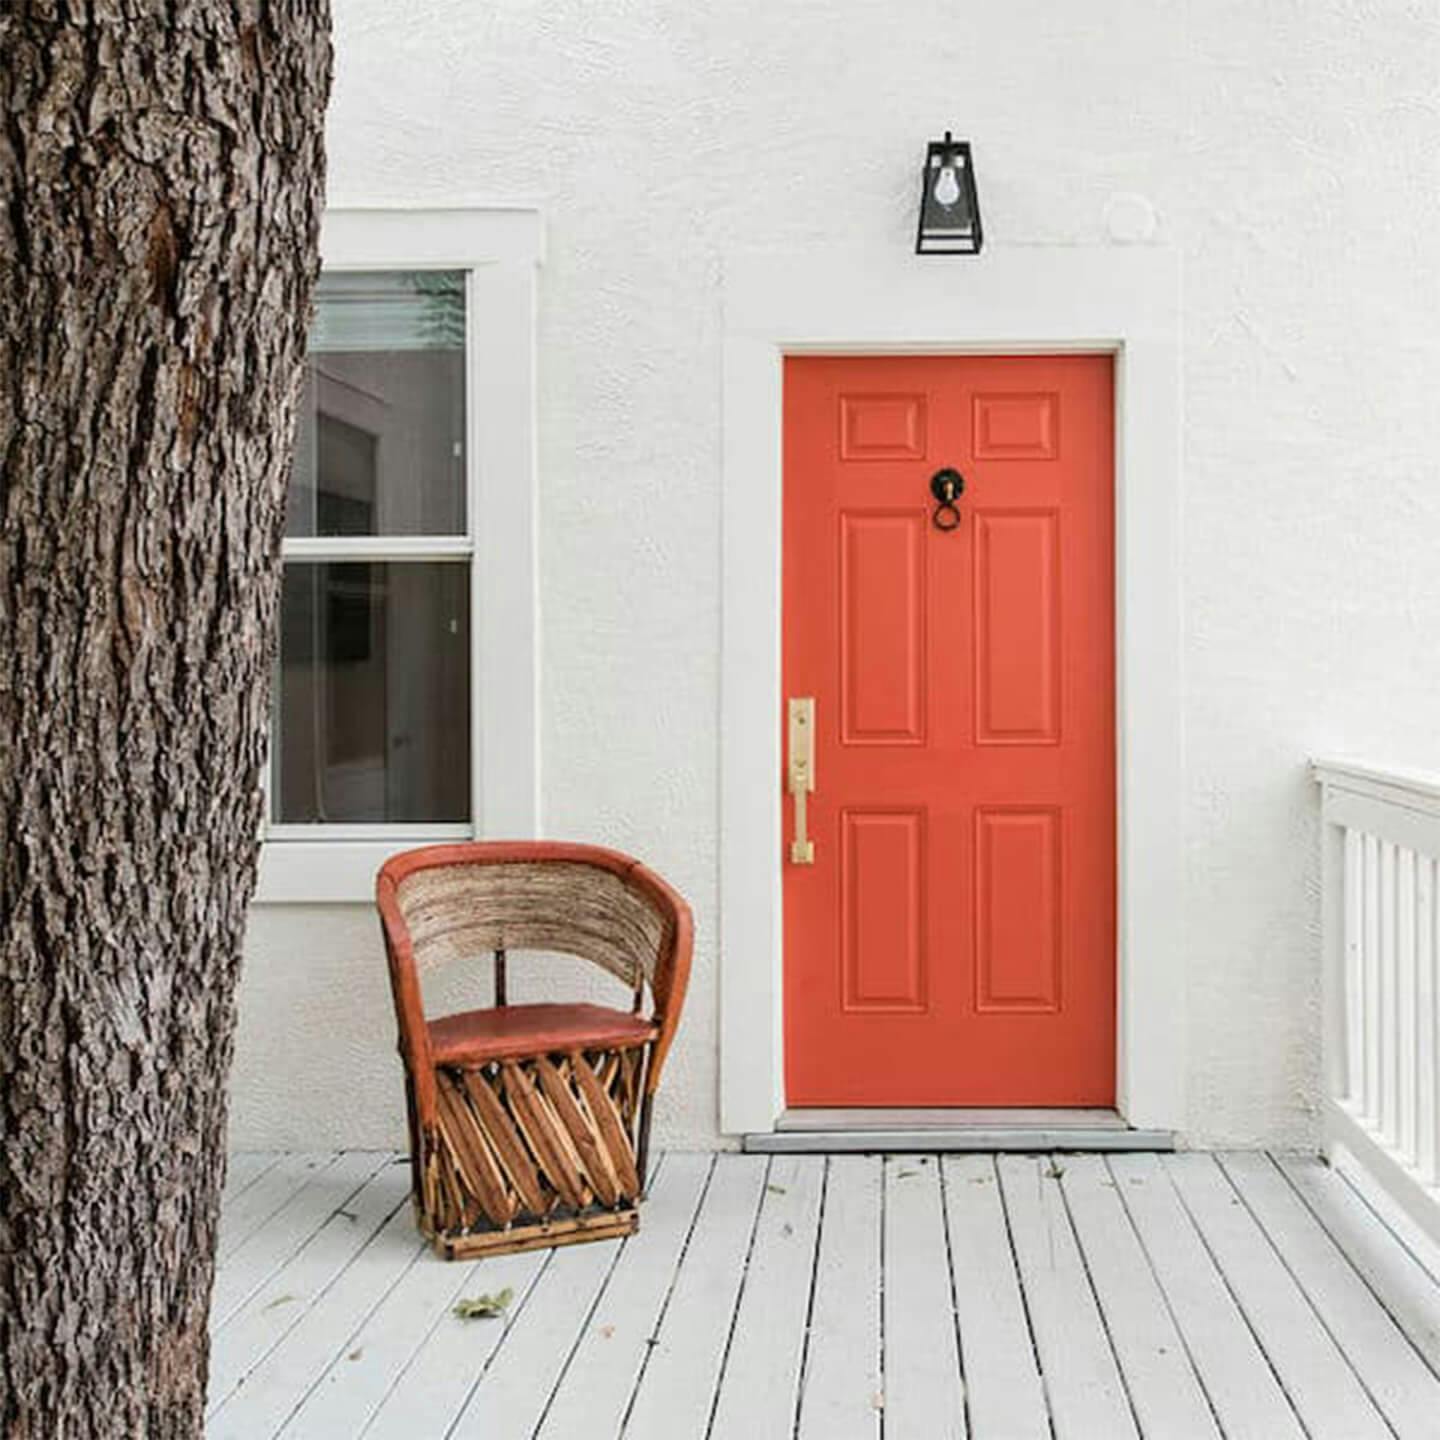 Exterior image of a front porch with white wood paneled flooring, white walls, with a bright red front door